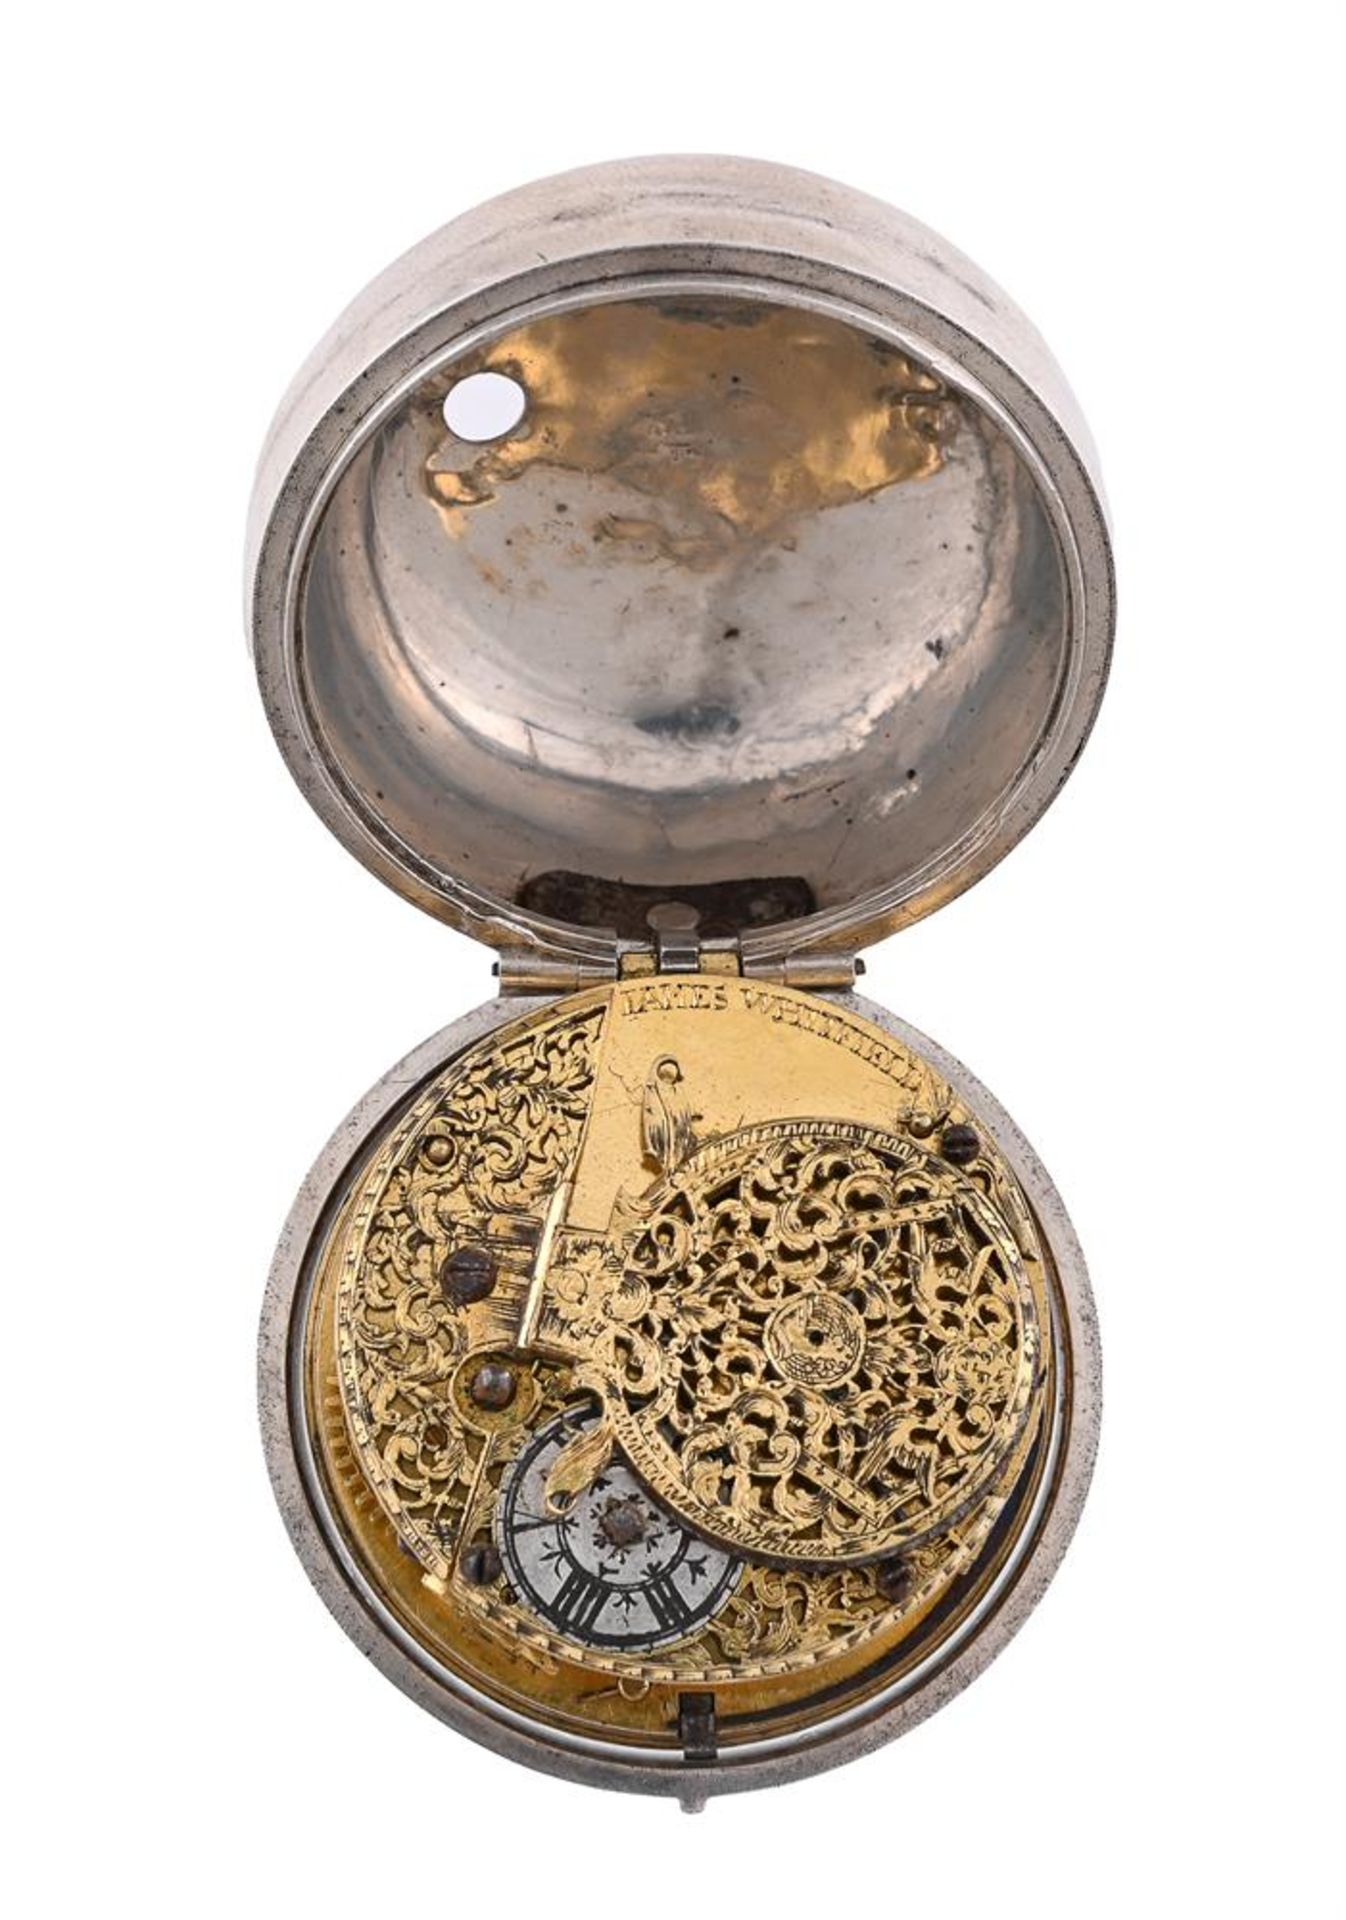 A RARE PROVINCIAL SILVER LARGER PAIR-CASED VERGE POCKET WATCH WITH CHAMPLEVE DIAL - Image 3 of 5